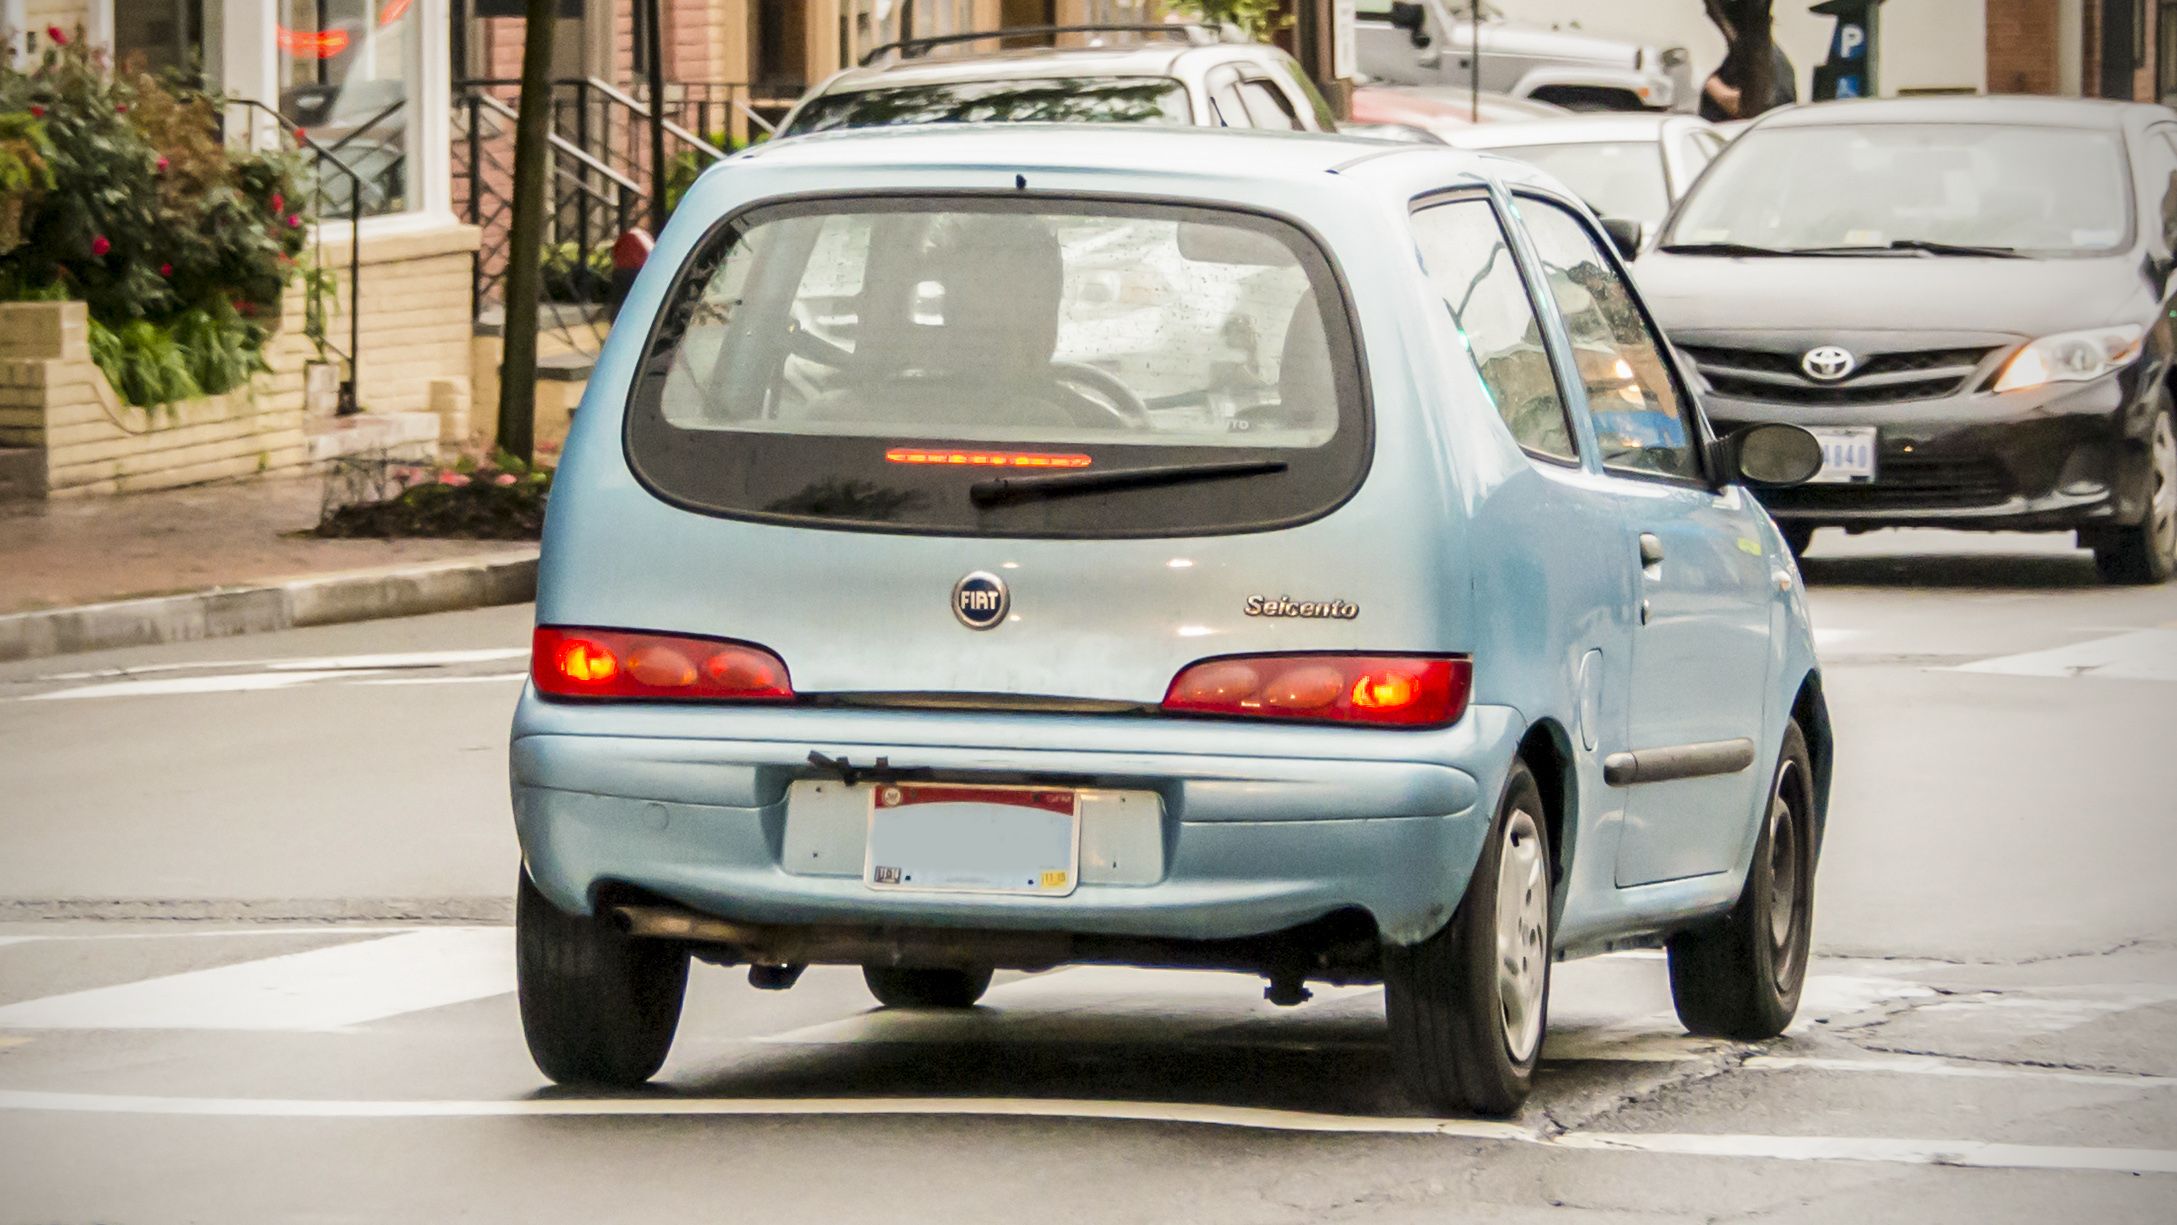 Fiat Seicento spotted in the US: the predecessors of the current